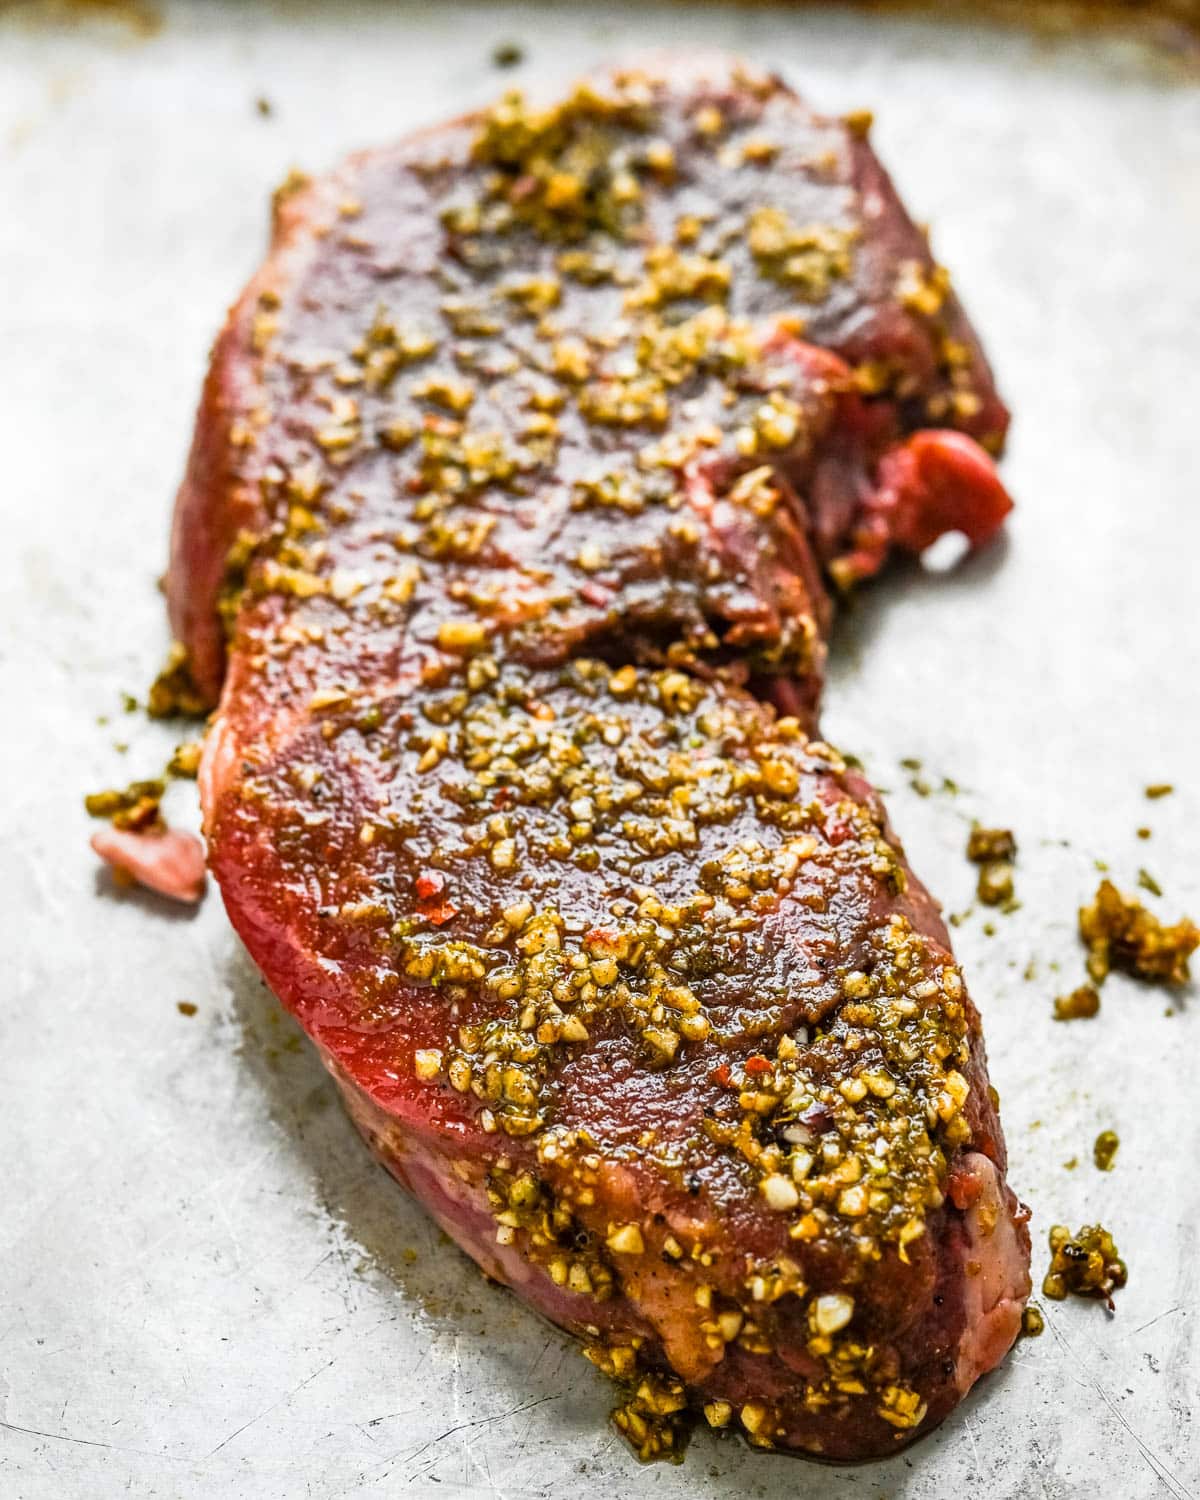 I am marinating the beef in the wet rub seasoning.